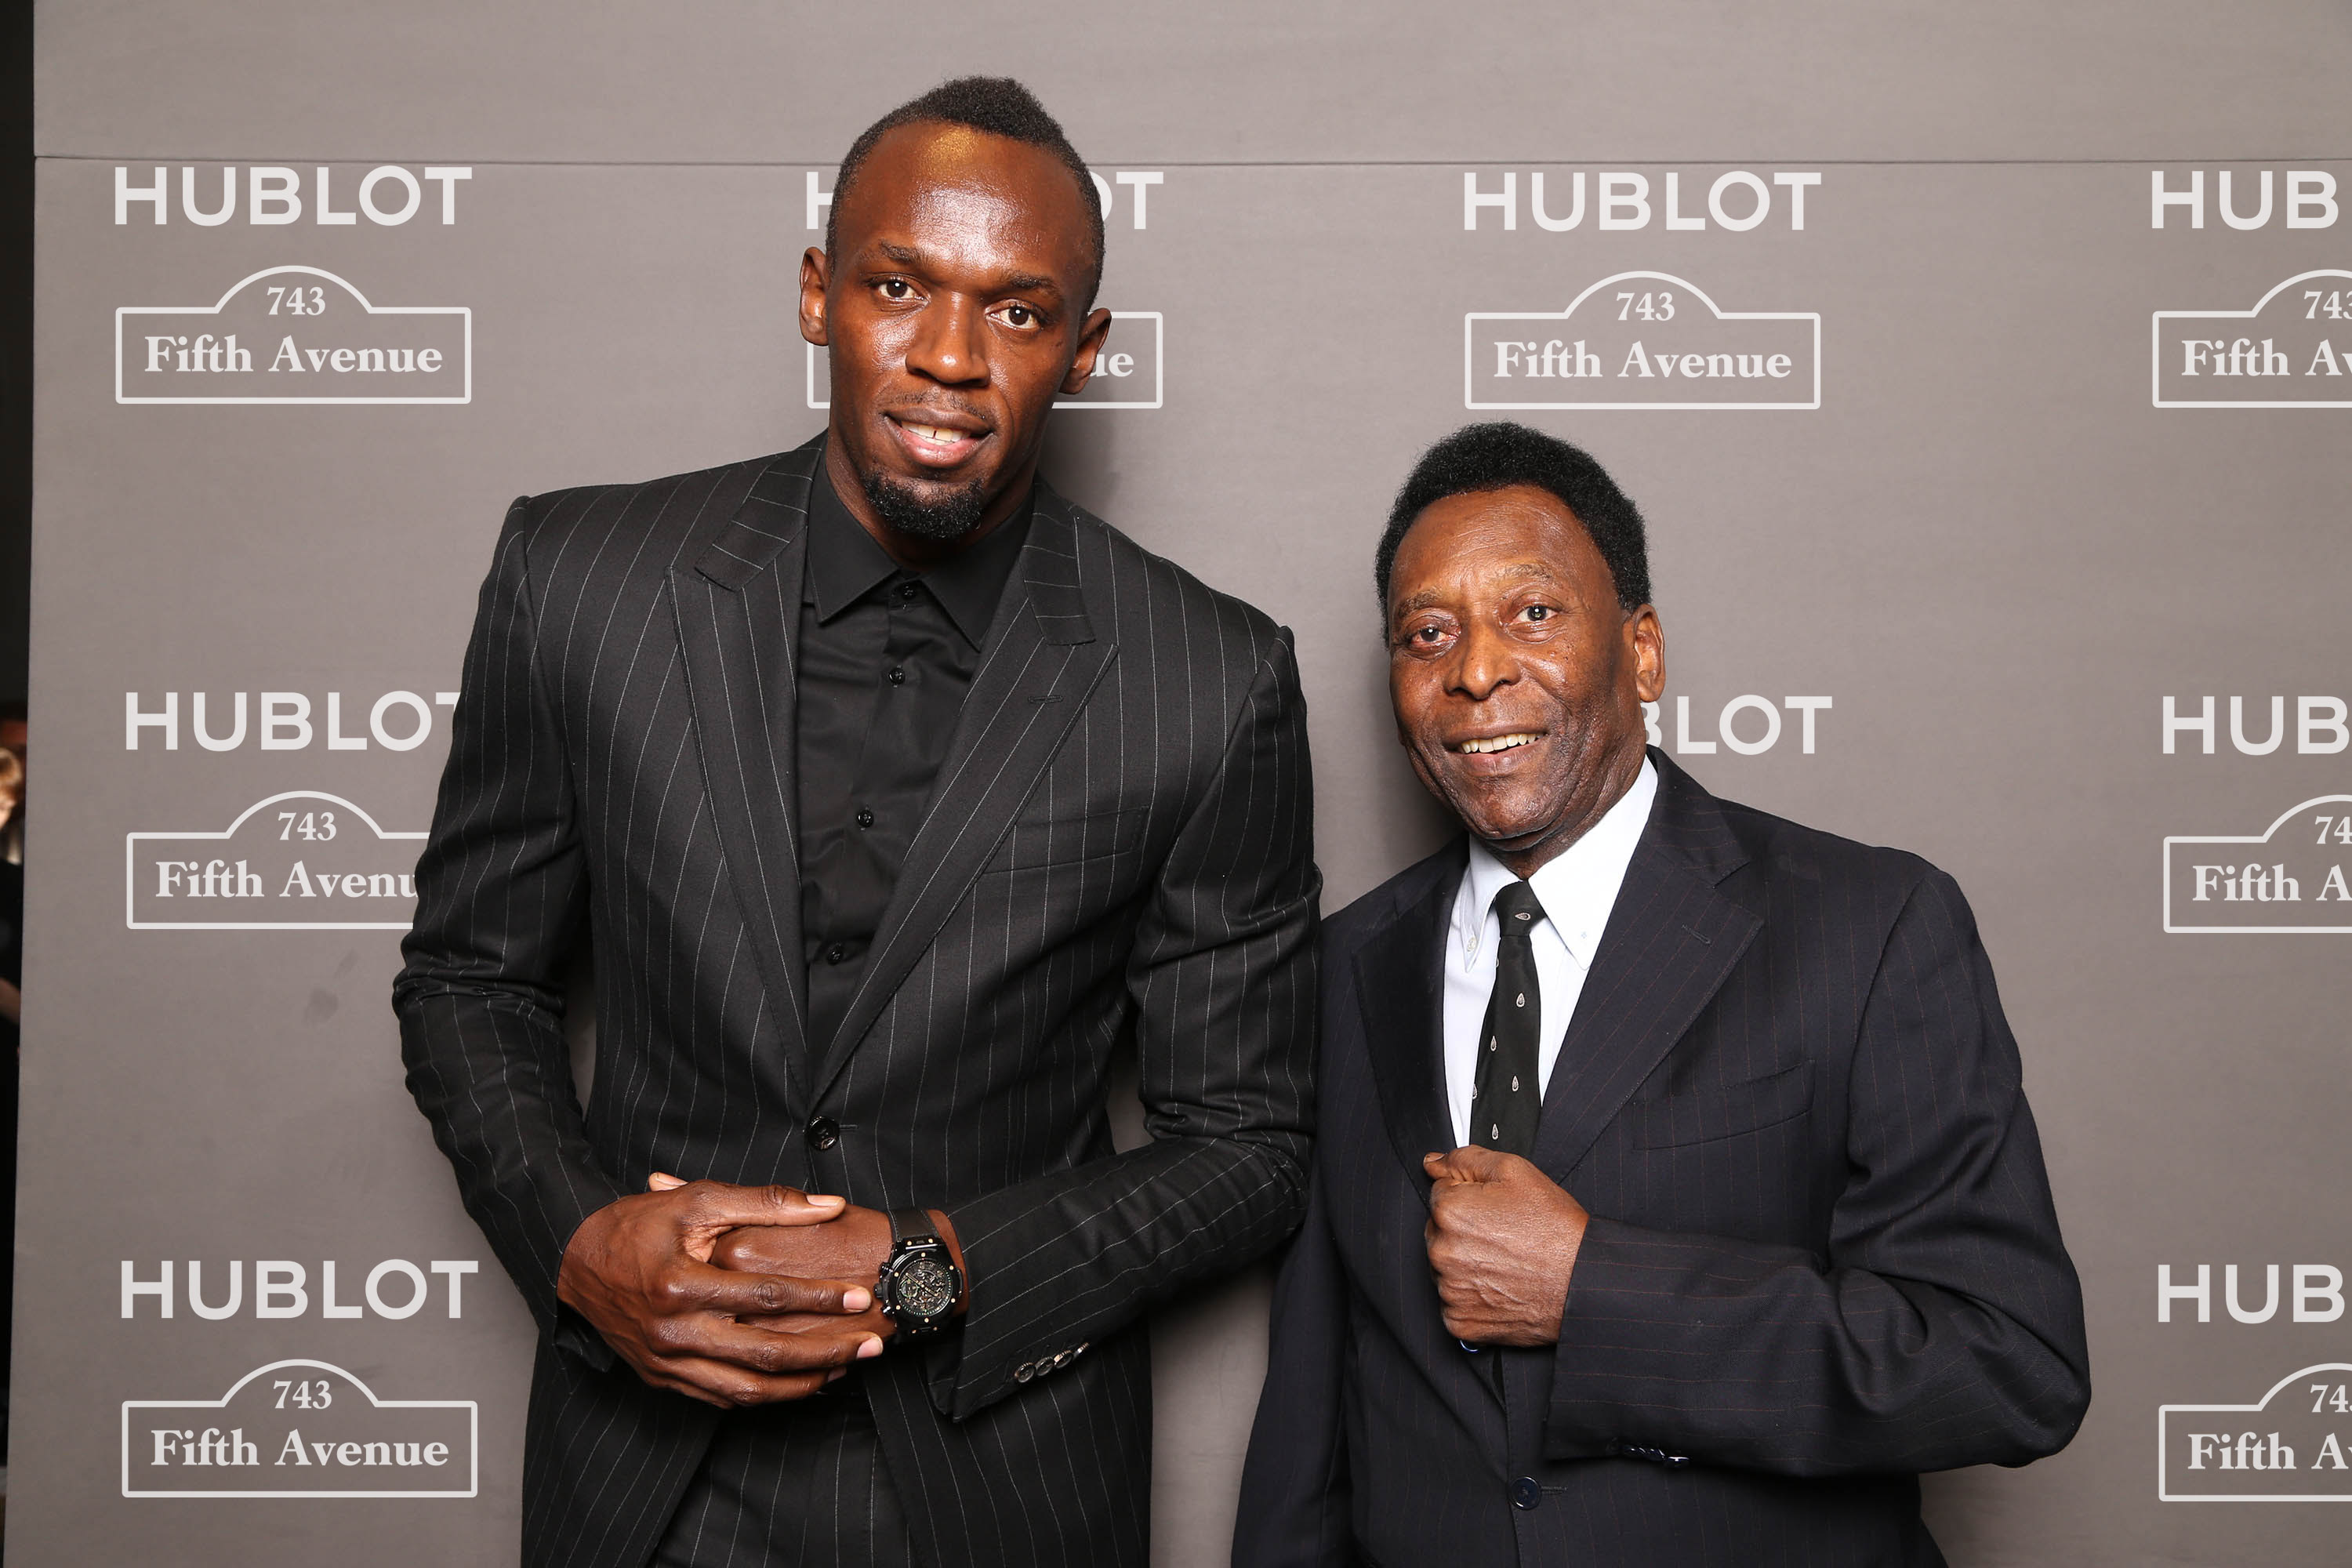 Hublot Scales Skyscrapers, Raps with Wyclef Jean and Celebrates New York Boutique Opening with Usain Bolt, Pele and Peter Marino